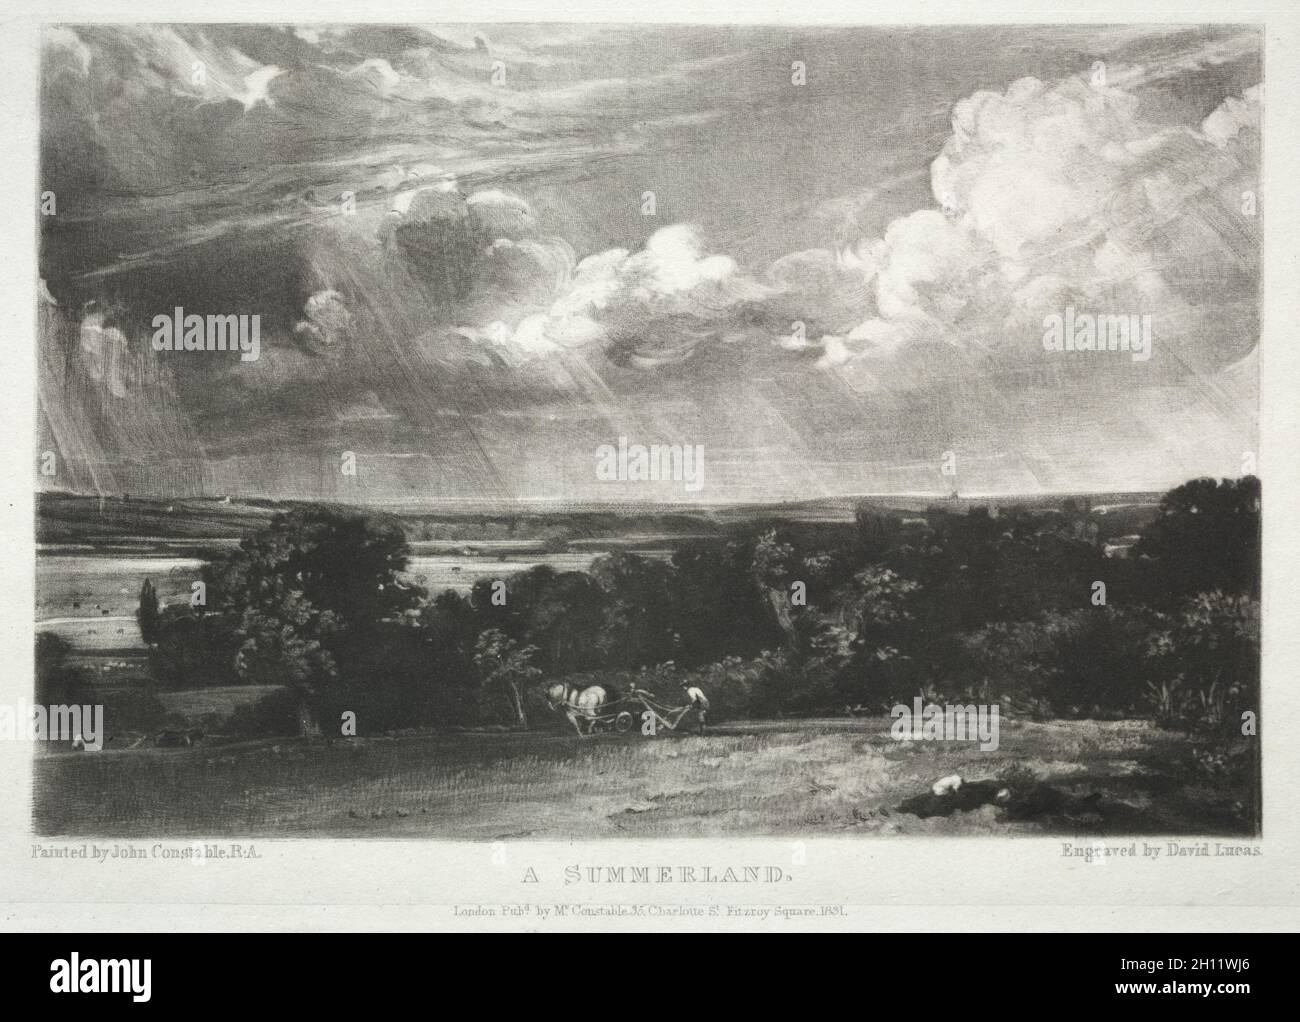 Various Subjects of Landscape, Characteristic of English Scenery from Pictures Painted by John Constable, R.A.: A Summerland, 1831. David Lucas (British, 1802-1881), after John Constable (British, 1776-1837). Mezzotint; Stock Photo